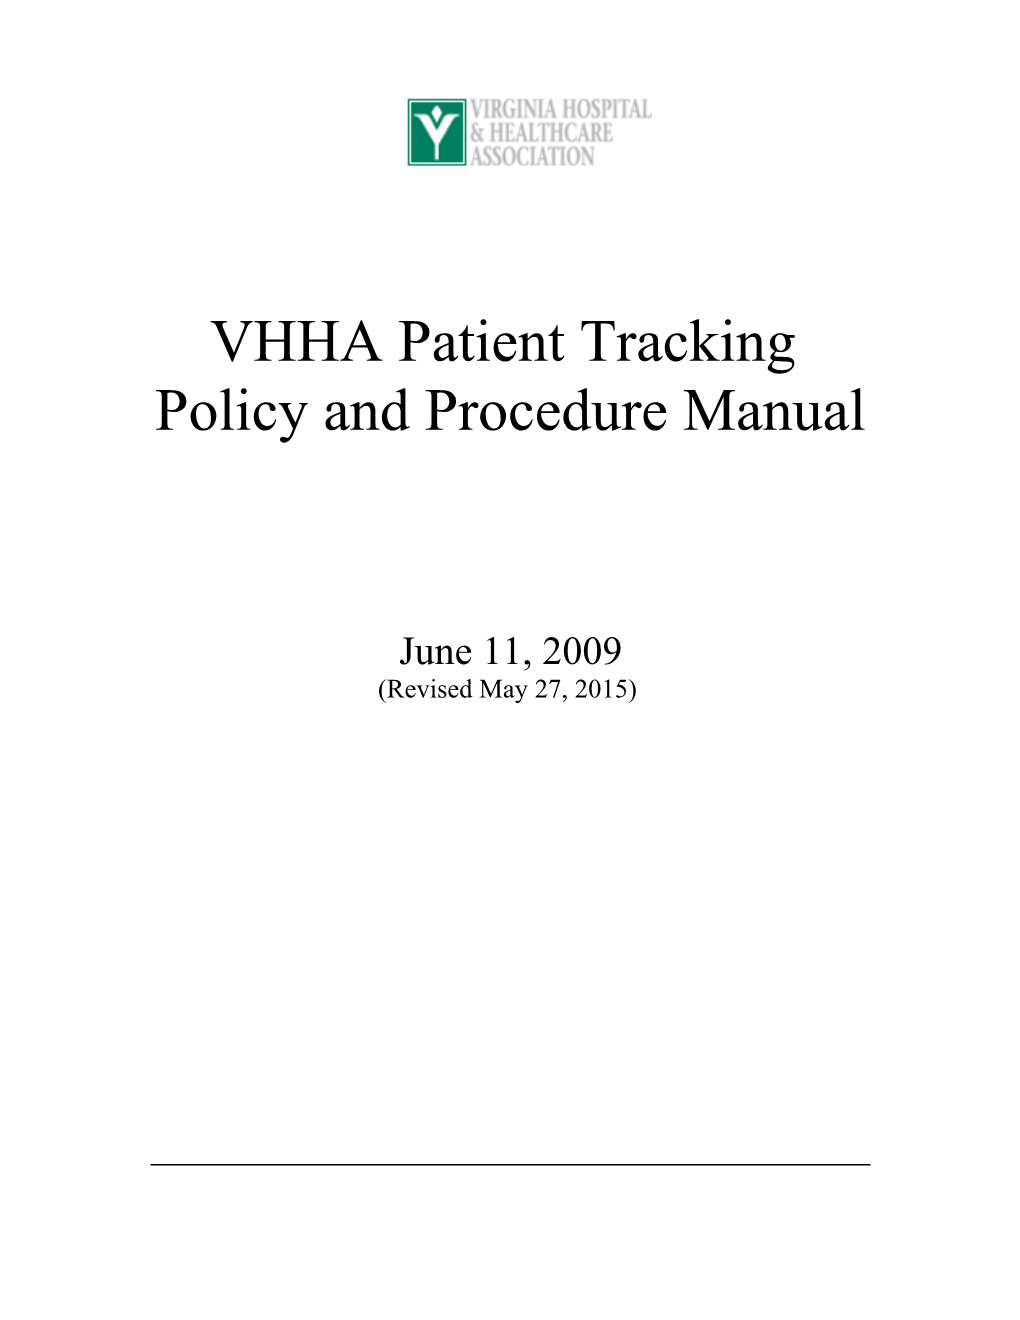 Report of VHHA Human Resources Work Group